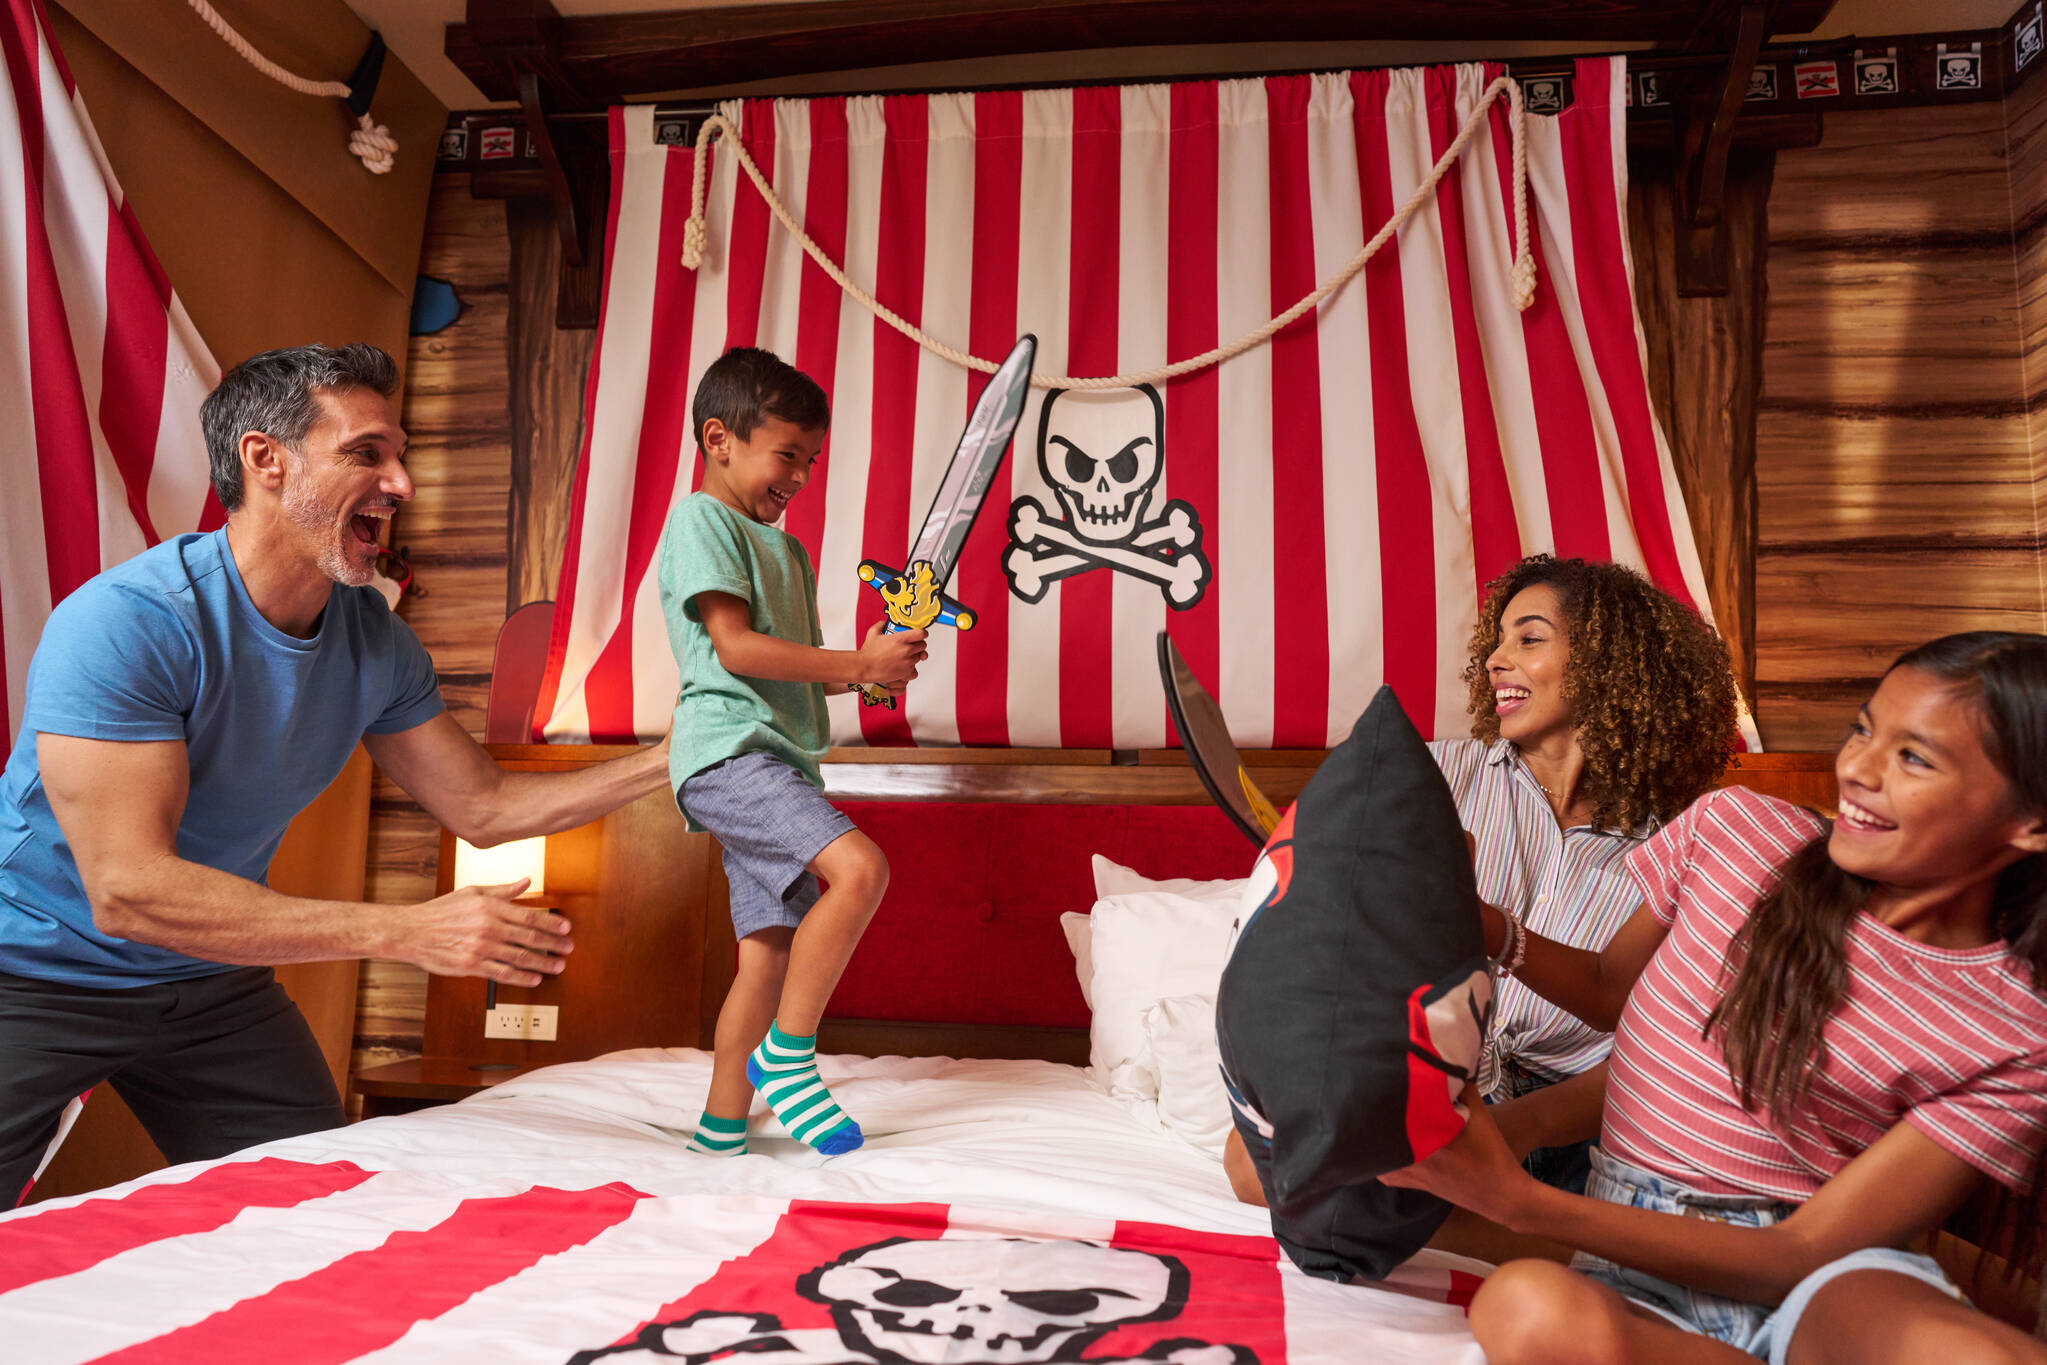 Family fun in a  Pirate Themed Hotel Room